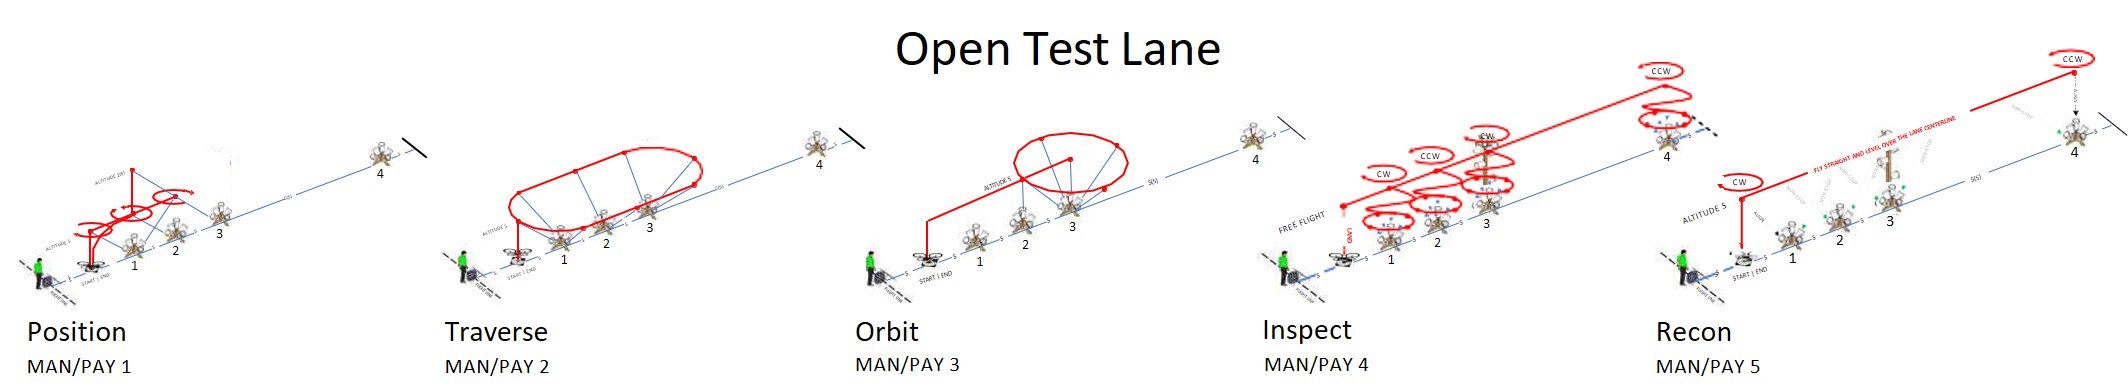 Open Test Lane uses the exact same set of apparatuses for 5 different tests.